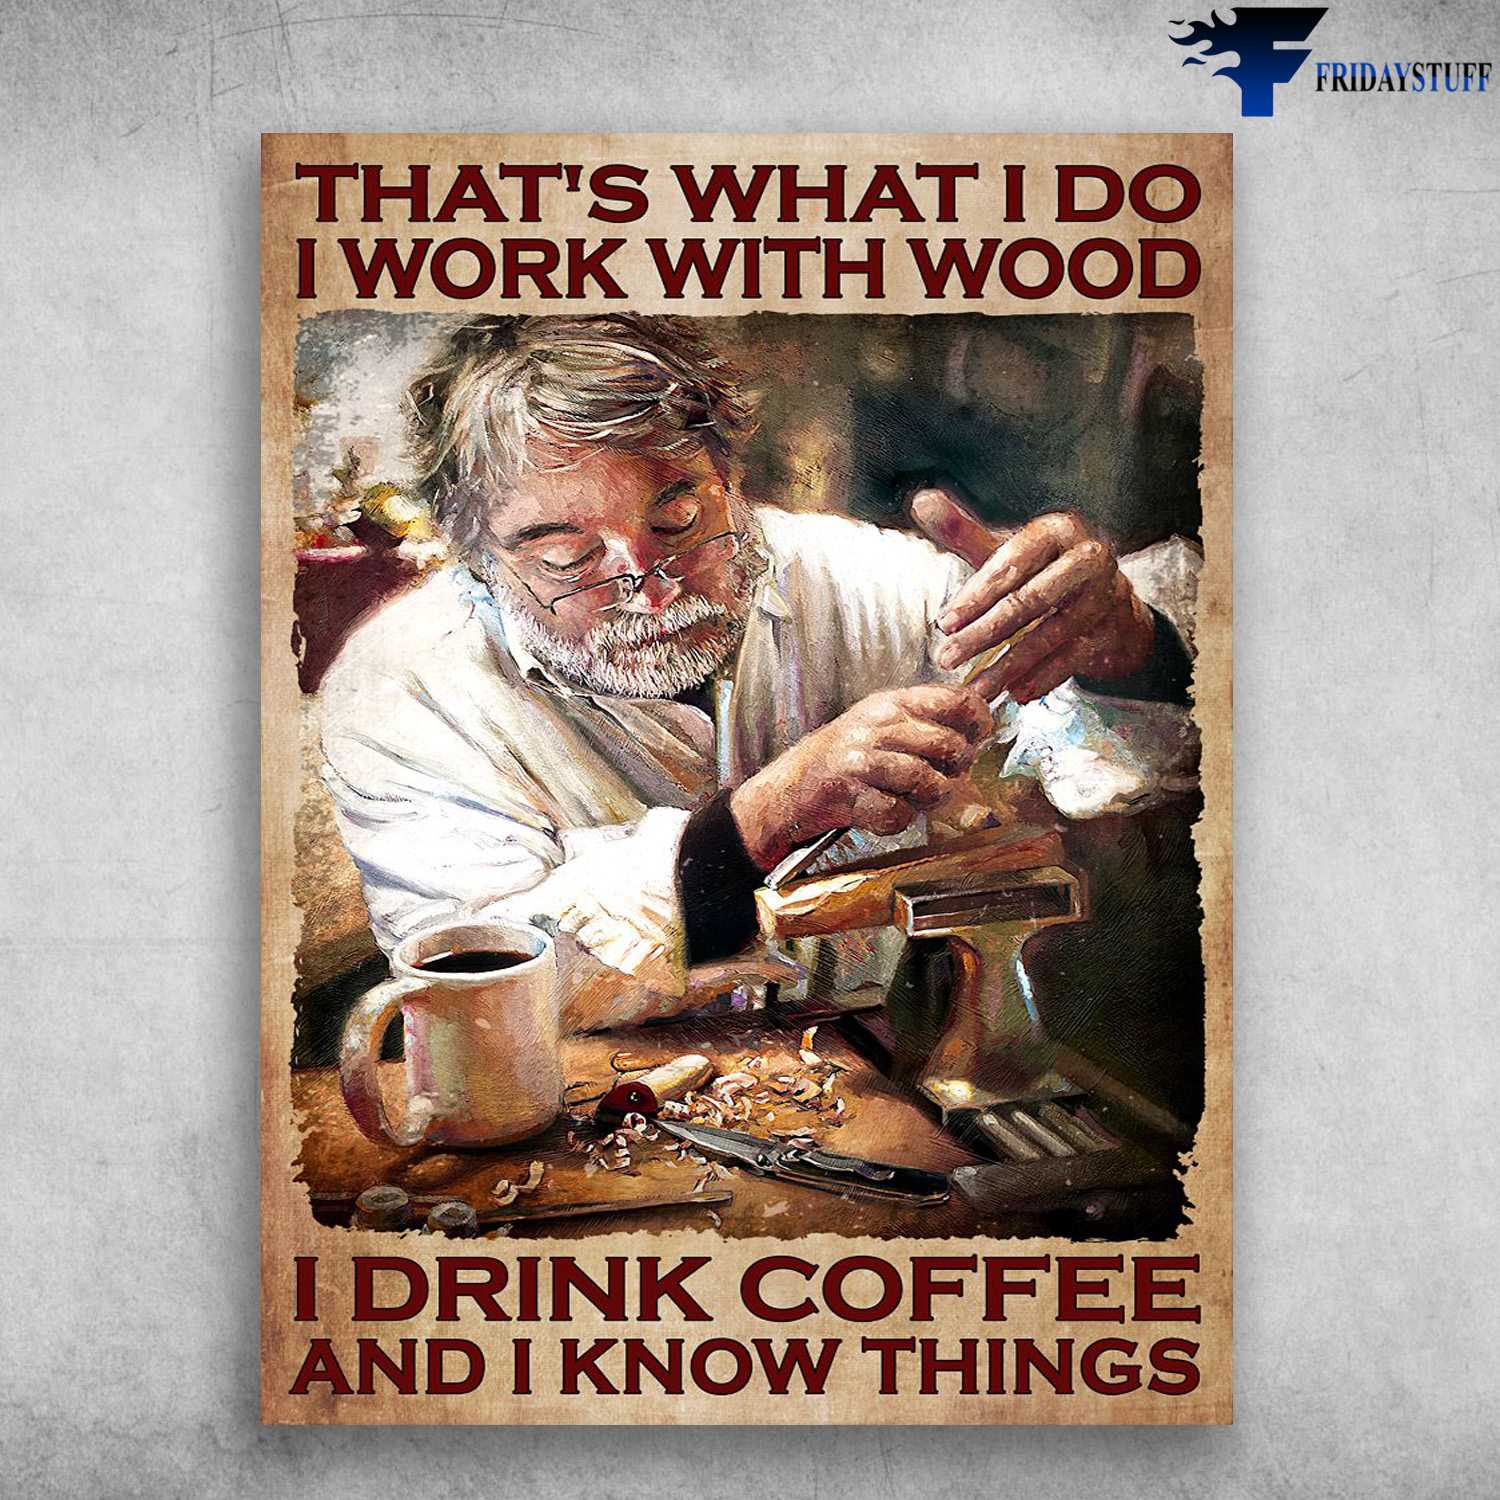 Old Carpenter - That's What I Do, I Work With Wood, I Drink Coffee, And I Know Things